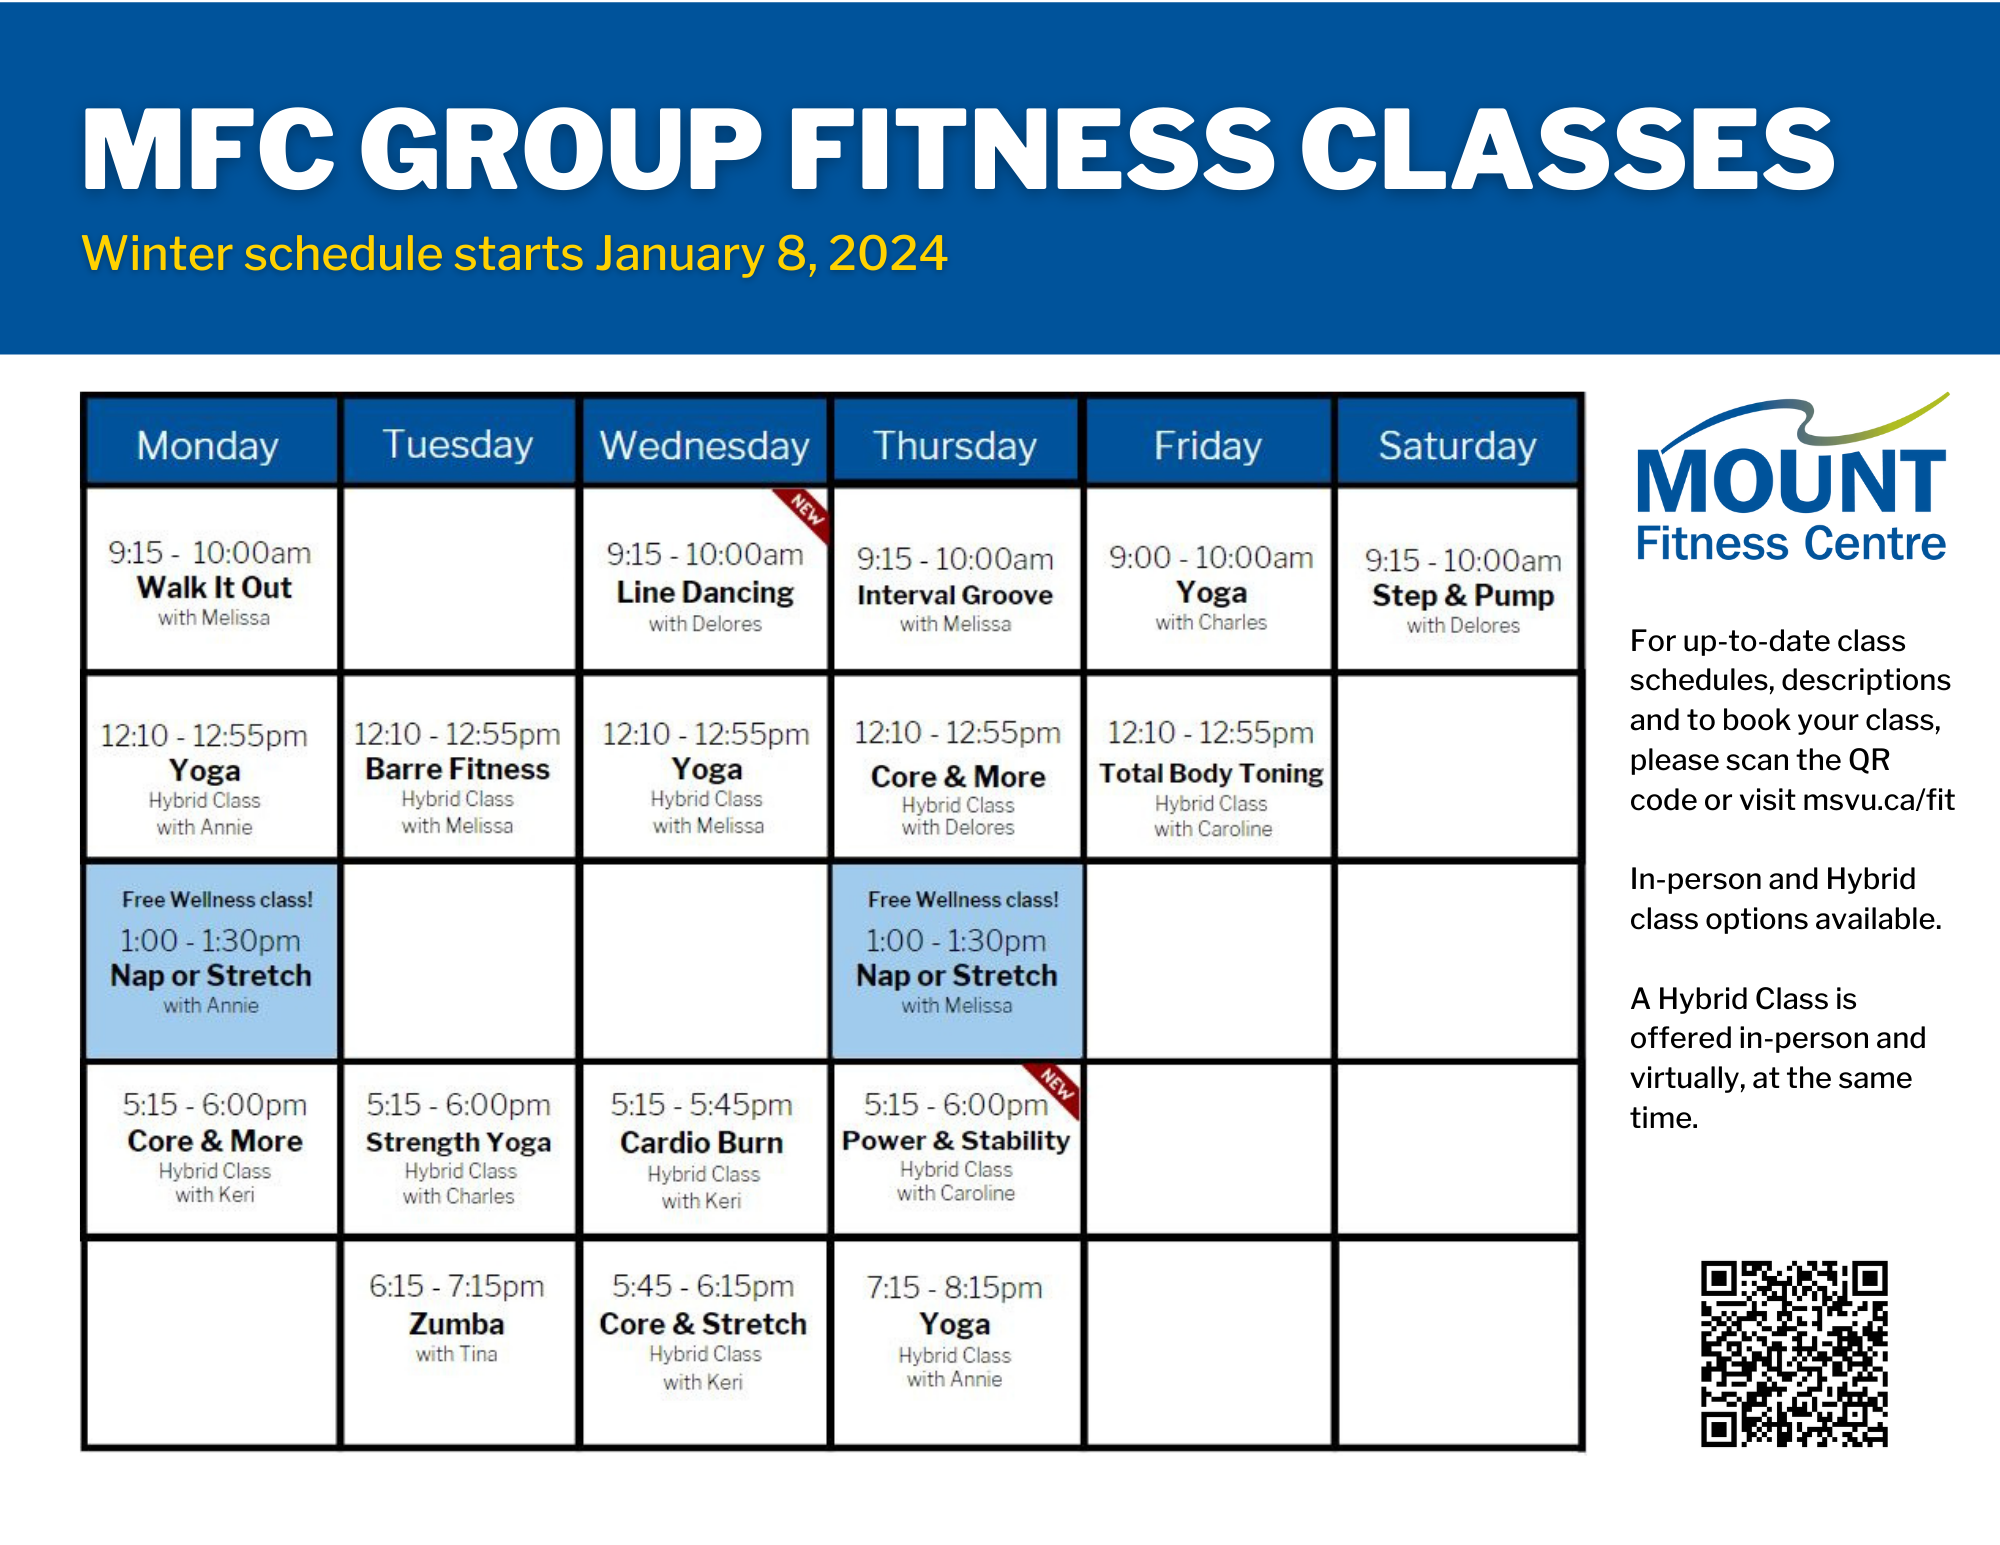 A fitness class schedule for the Mount Fitness Centre. Lists class options by day.